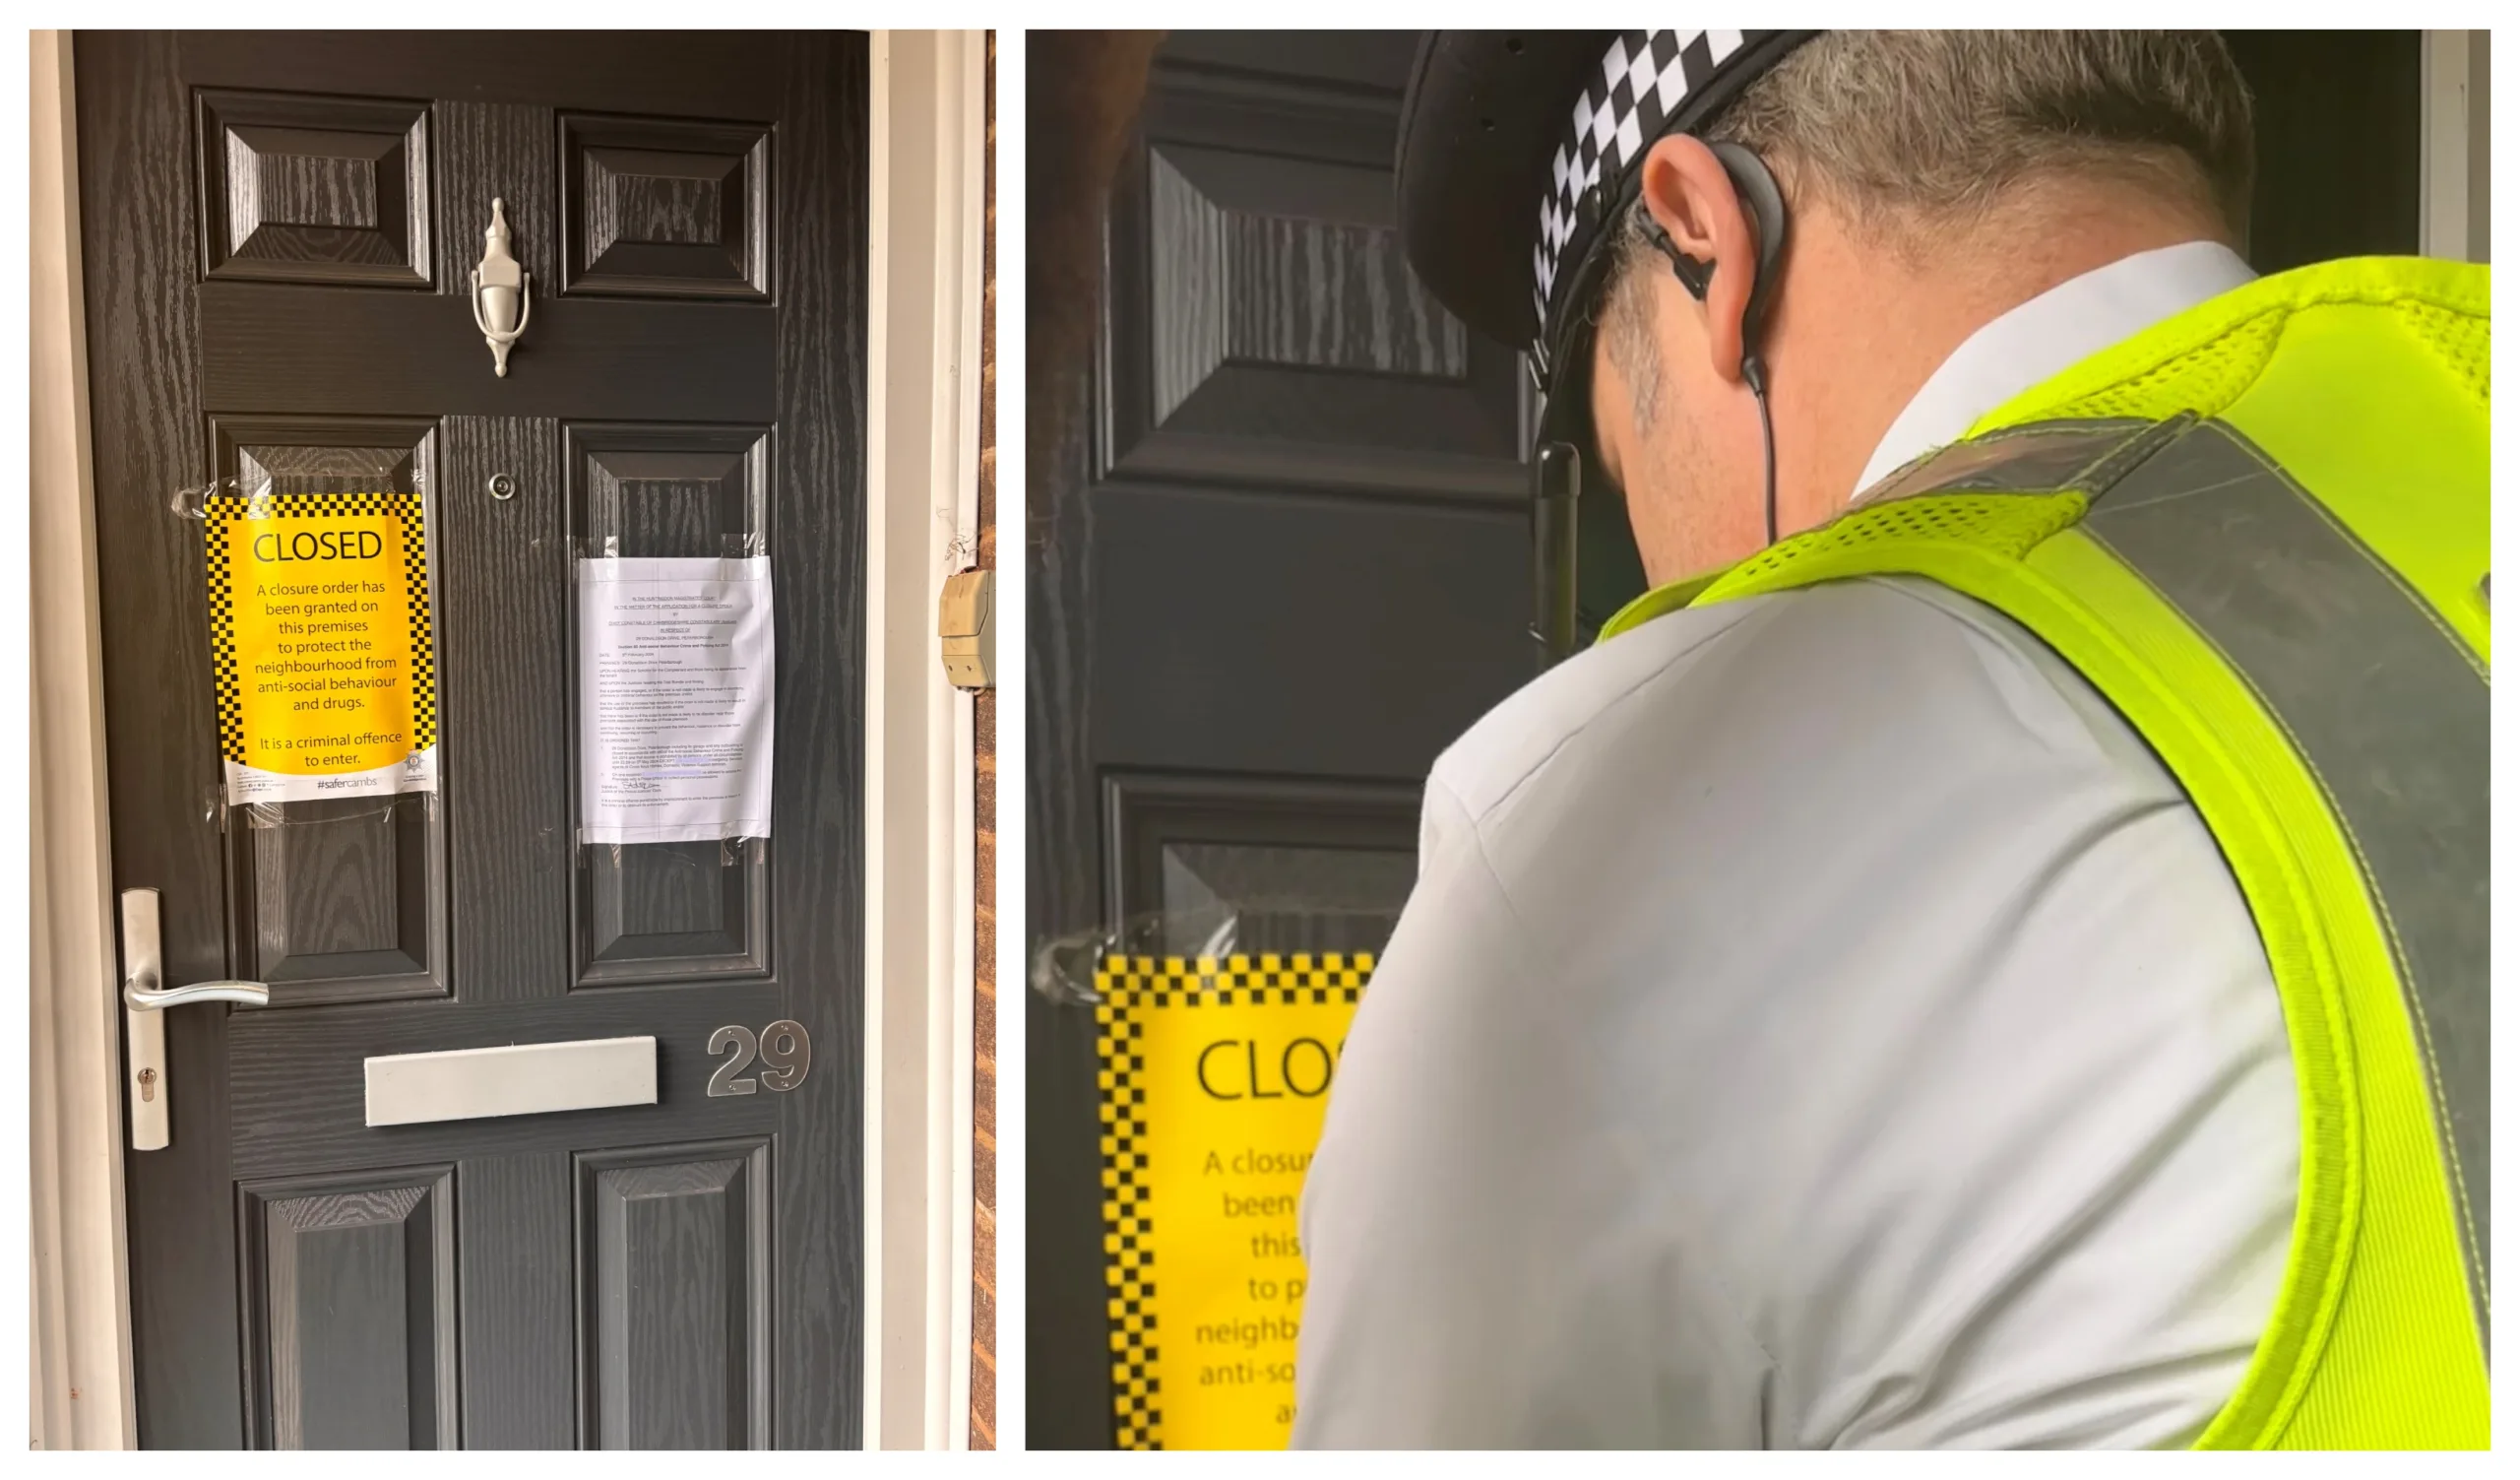 The order, which is in place until 5 May, states 29 Donaldson Drive, Gunthorpe, is closed to anyone other than the legal tenant, emergency services, support services and employees of Cross Keys Homes.